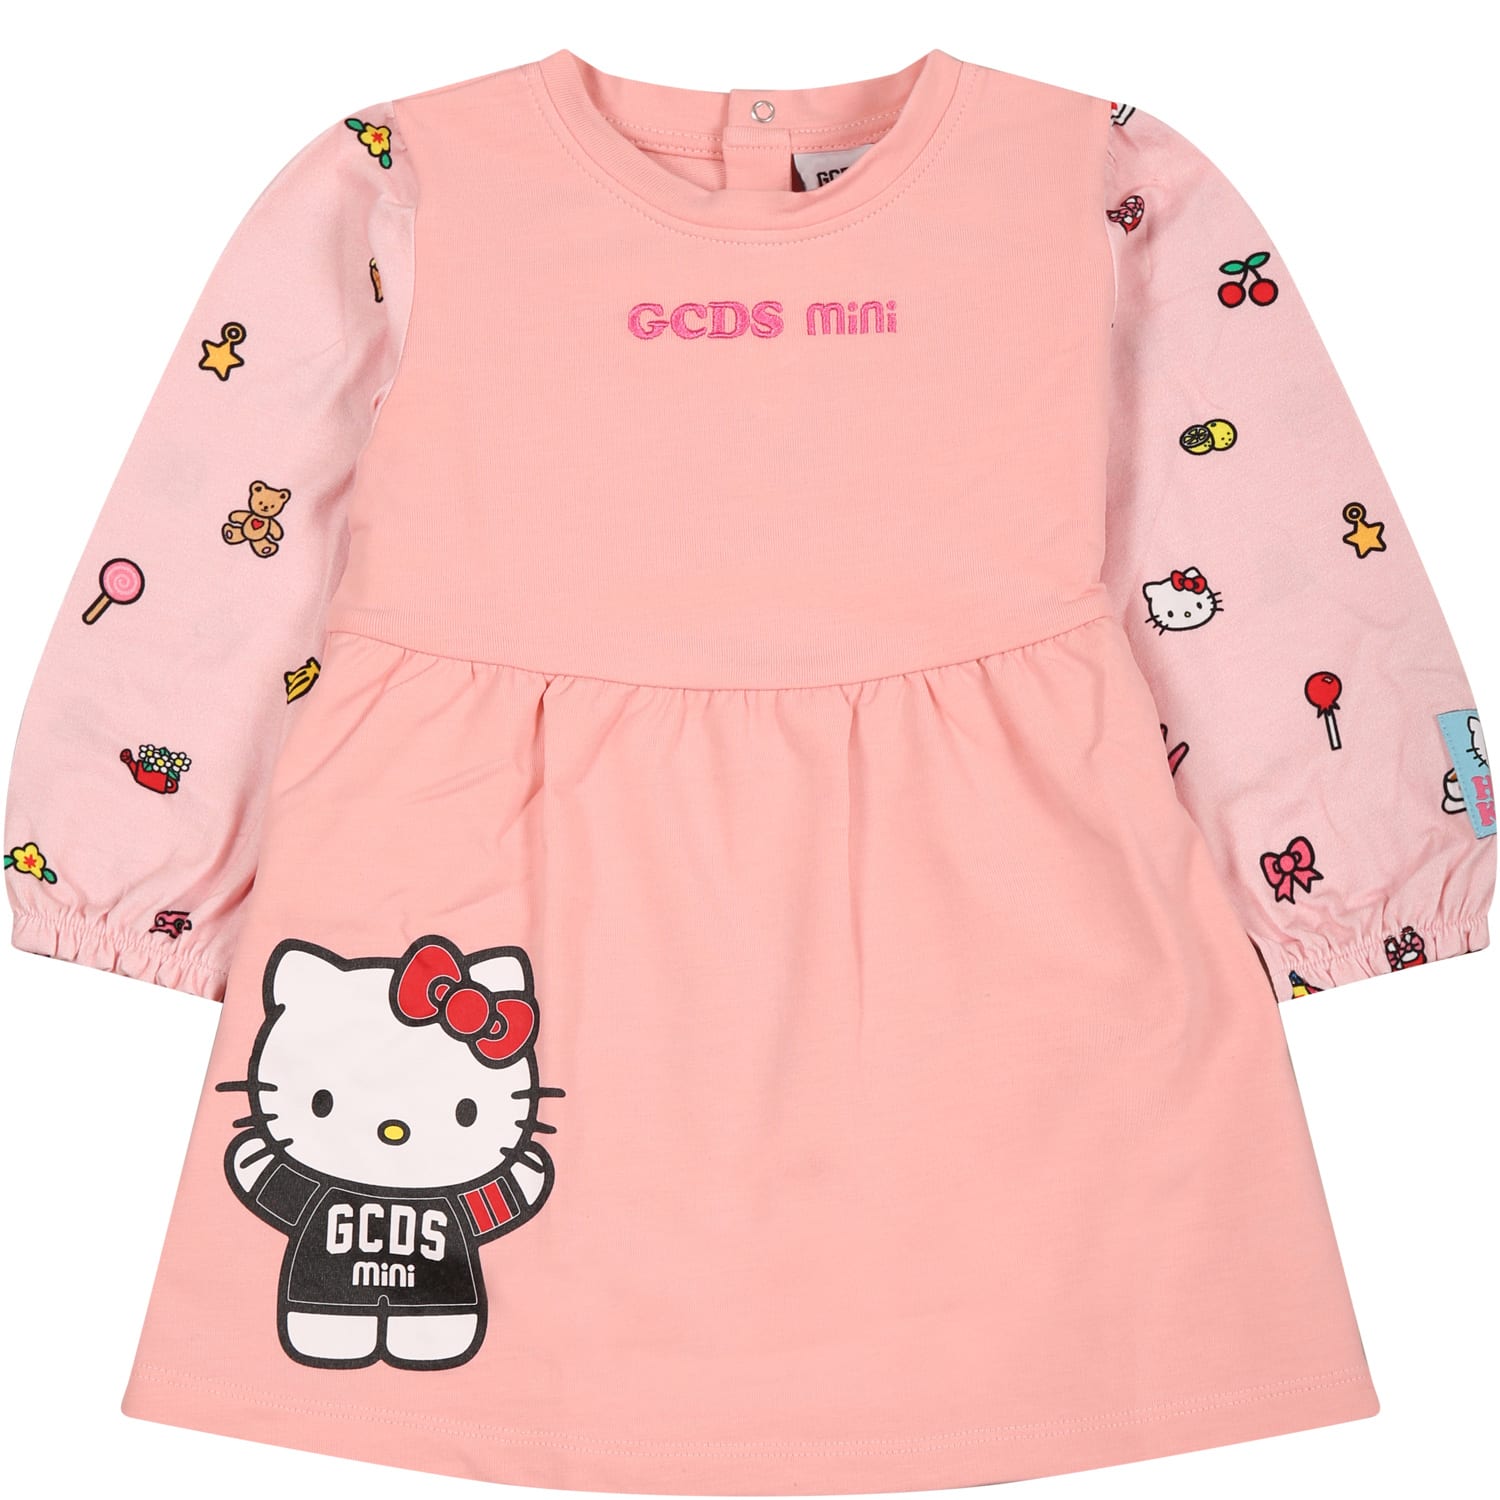 Gcds Mini Pink Dress For Baby Girl With Print And Logo